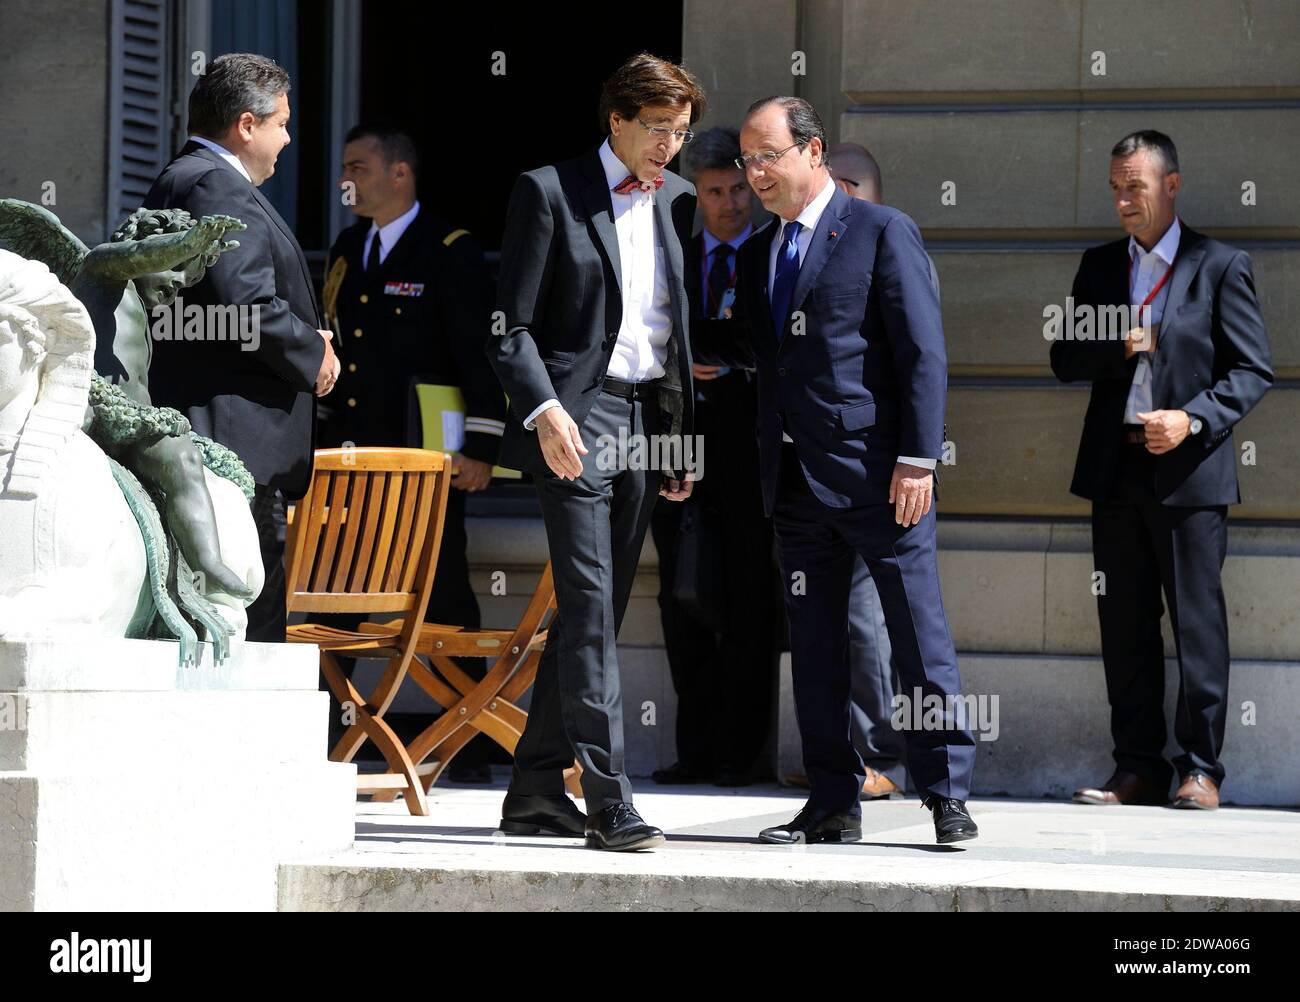 Prime Minister of Belgium Elio Di Rupo and Francois Hollande attending an informal European meeting at the Elysee palace in Paris, France, on June 21, 2014. Photo by Jacques Witt/Pool/ABACAPRESS.COM Stock Photo